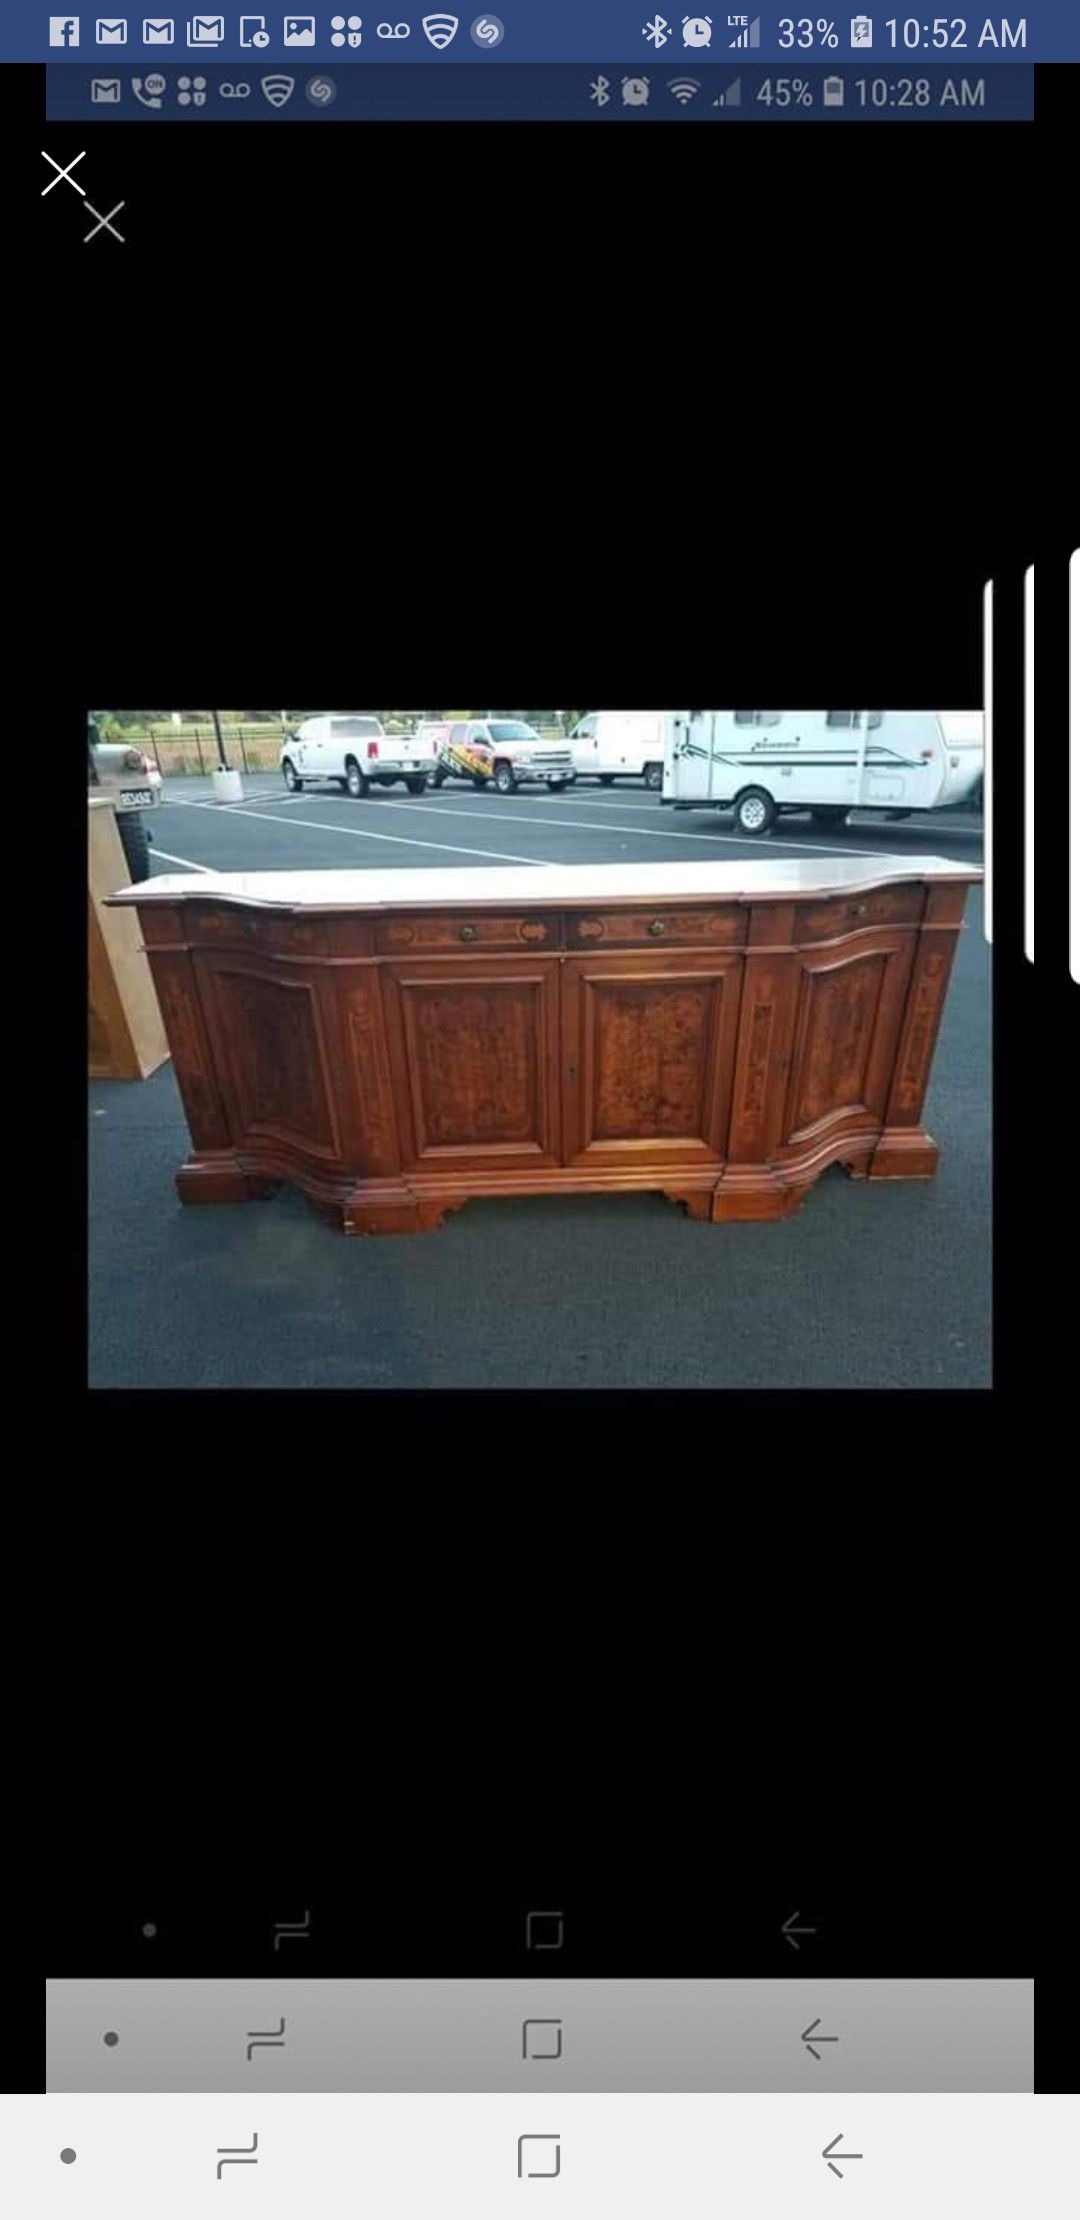 8ft long buffet server comes with key. In excellent condition